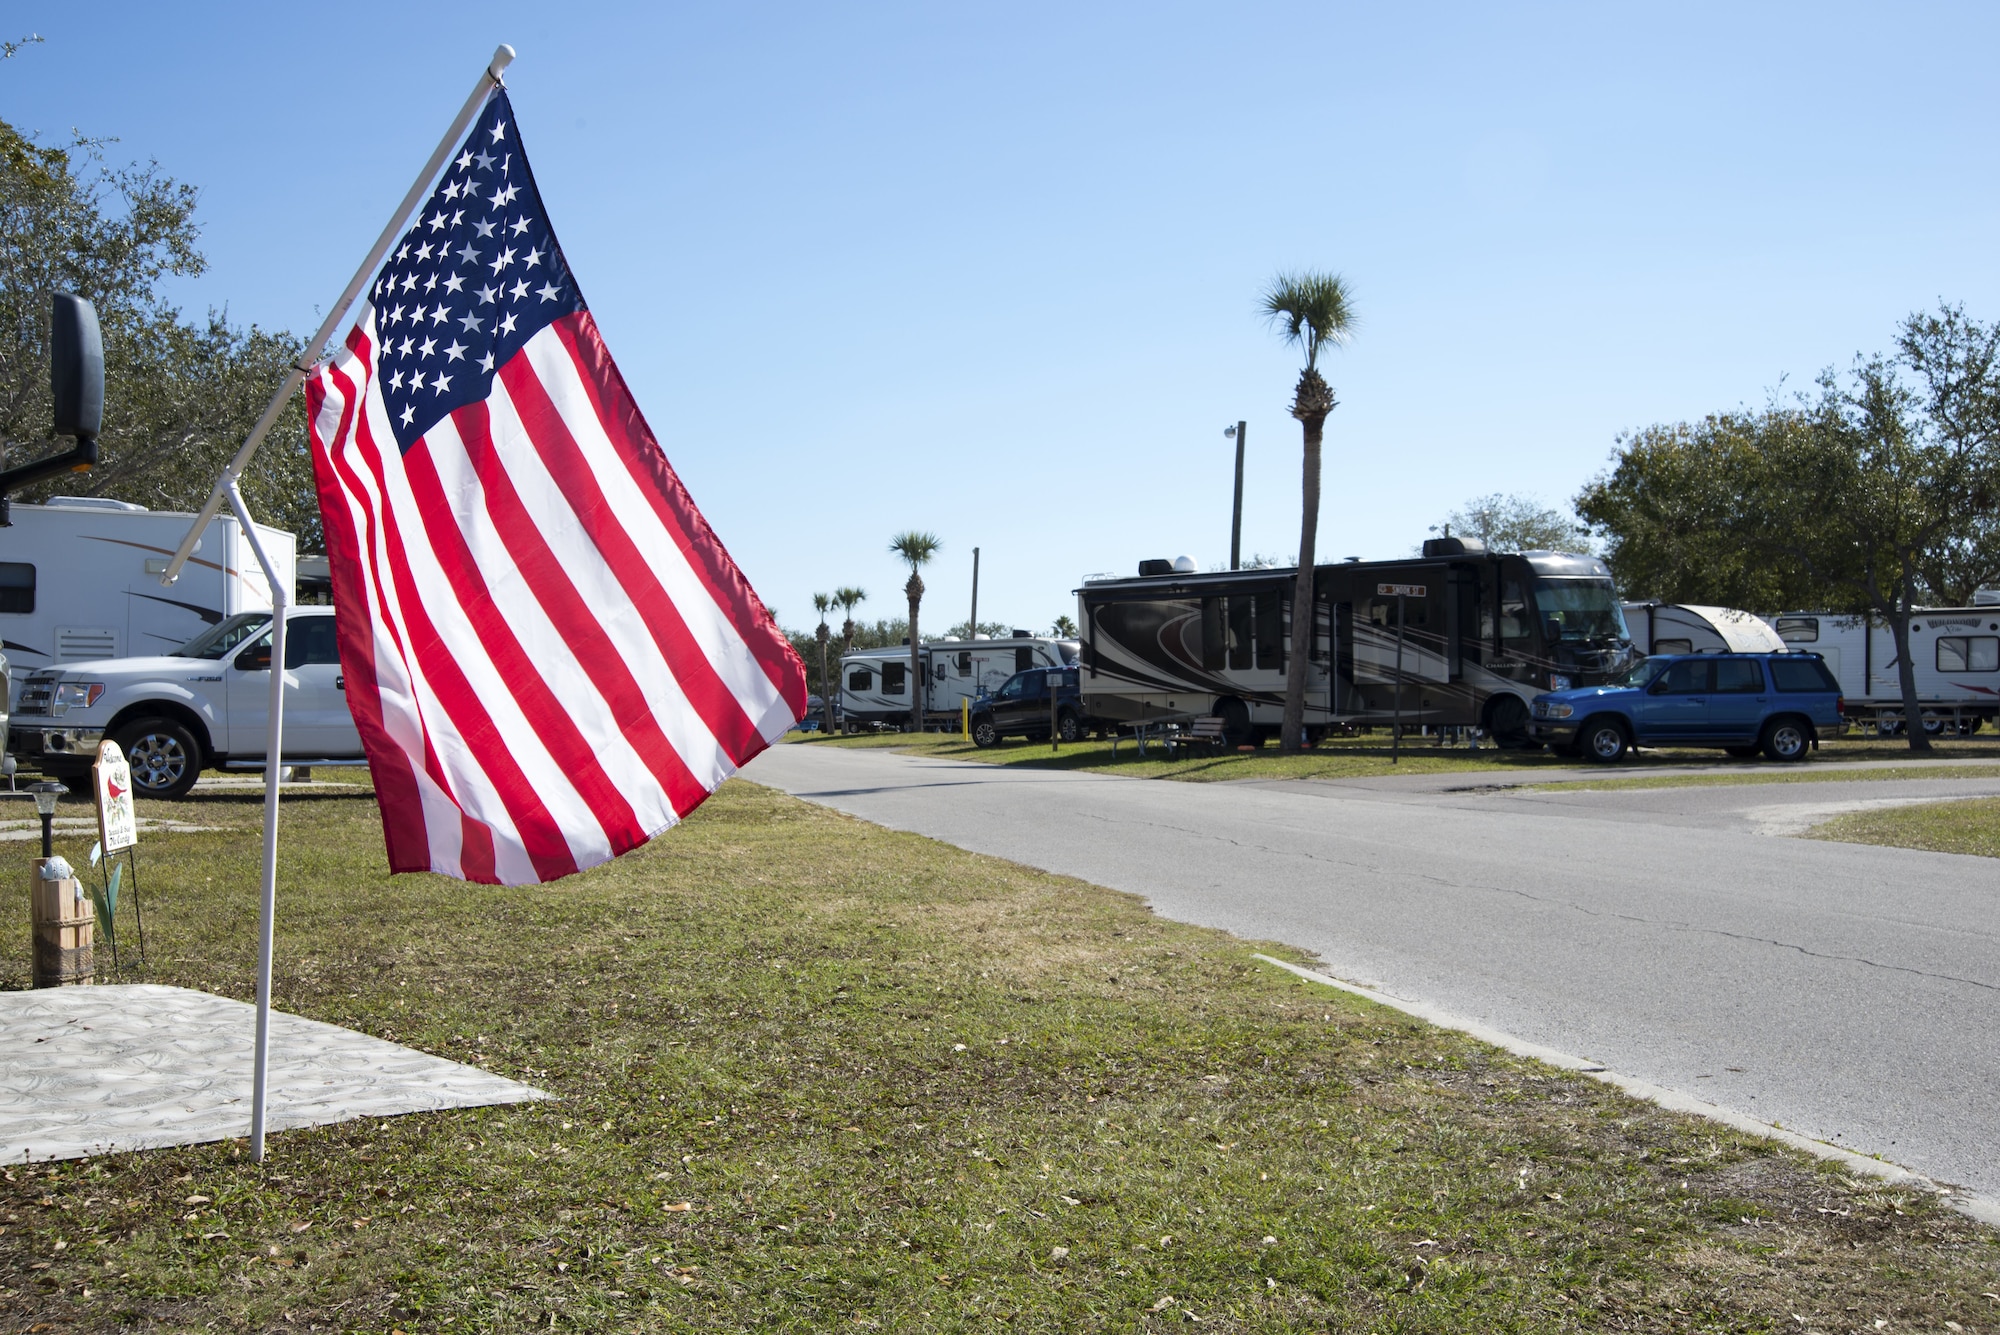 The family campground, better known as “FamCamp”, is a community that allows people to temporarily reside within its campgrounds for six month intervals at MacDill Air Force Base, Florida.